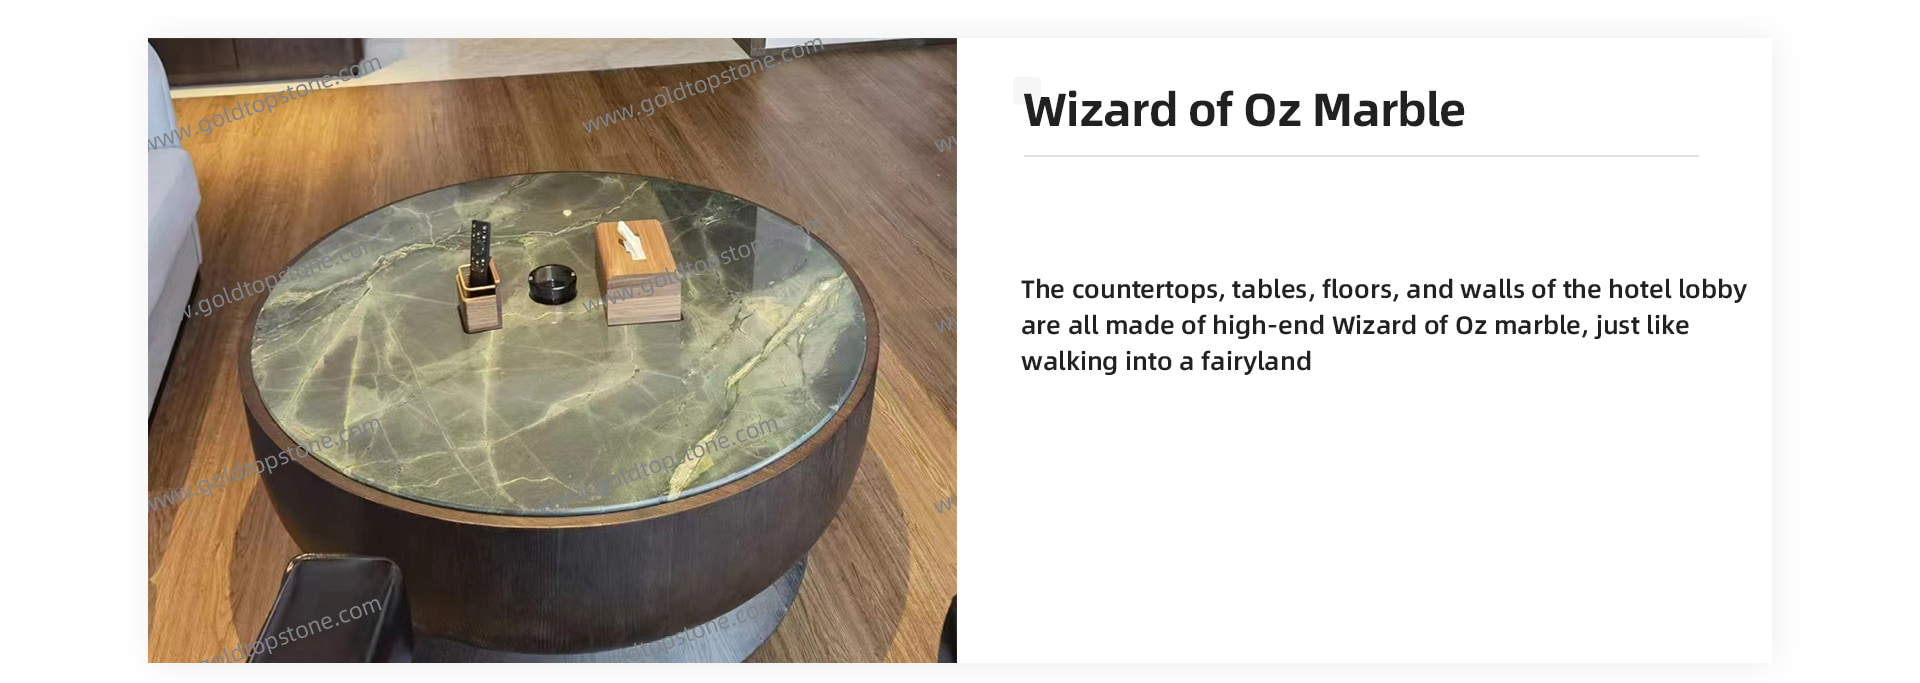 The countertops, tables, floors, and walls of the hotel lobby are all made of high-end Wizard of Oz Marble, just like walking into a fairyland.